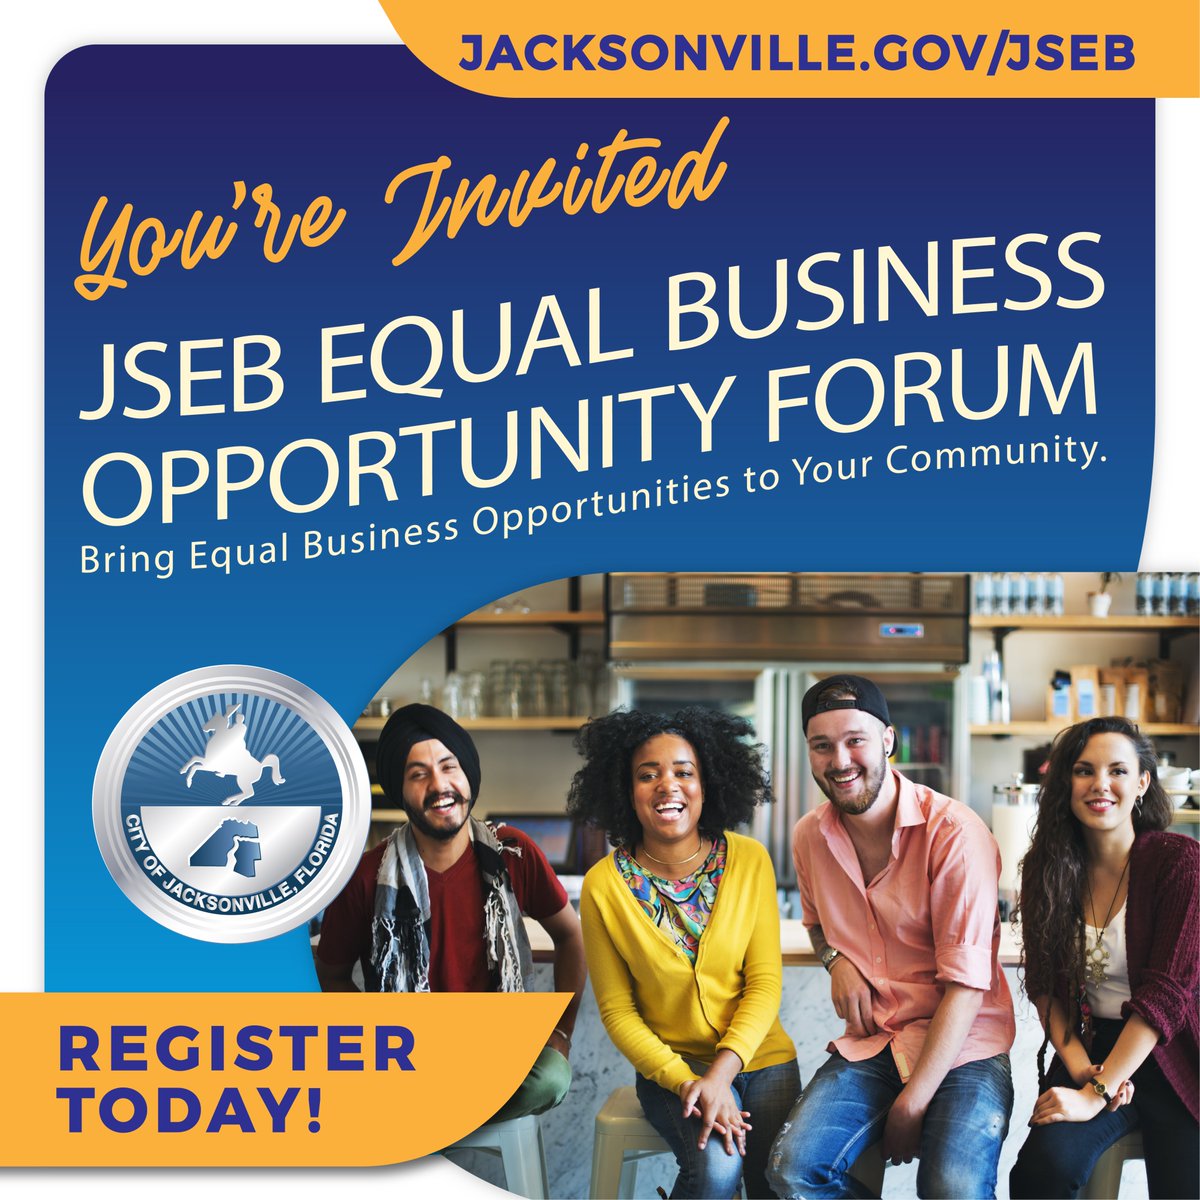 Small business owners - The next JSEB Equal Business Opportunity Forum is at 6pm tonight, Thursday, April 18th at the Frances Padgett Senior Center (1078 Rogero Rd). Develop productive business relationships and learn about opportunities with the City: jacksonville.gov/departments/ja…